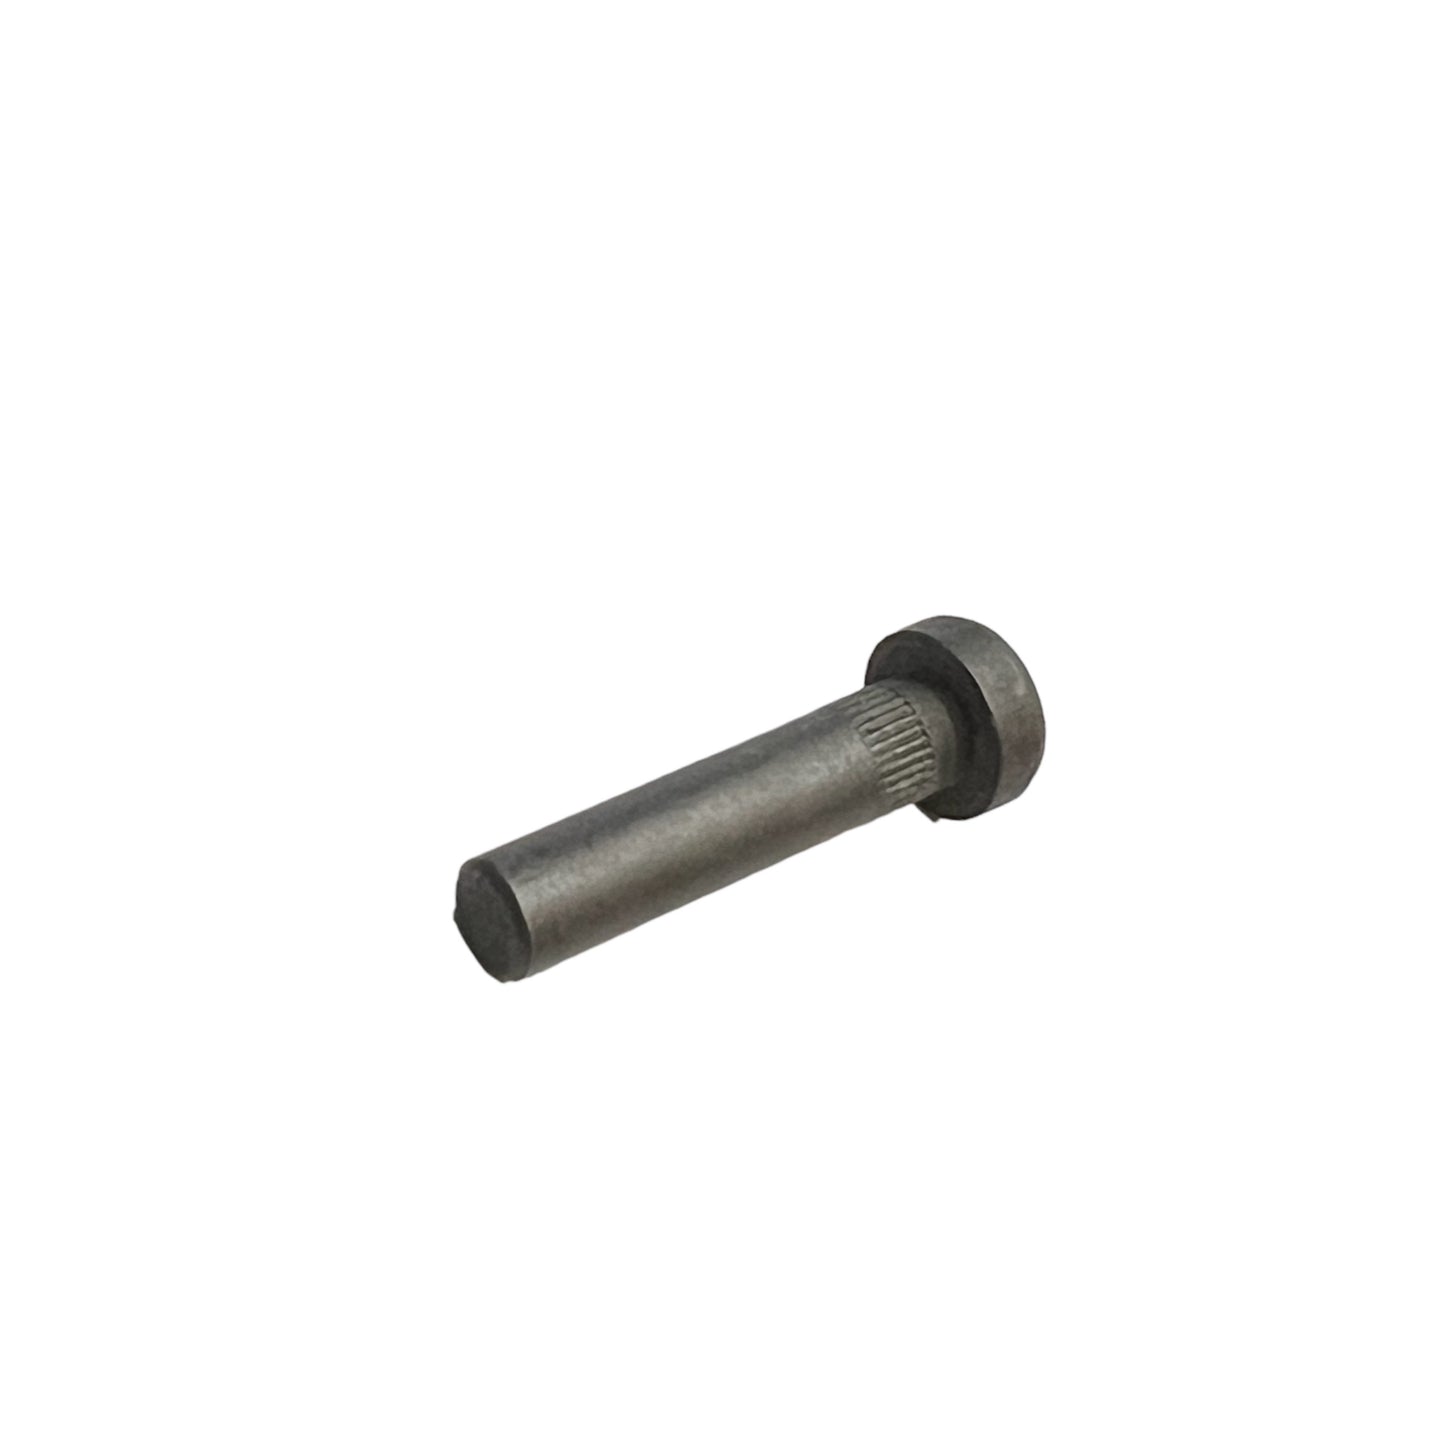 Replacement Rear Body Pin